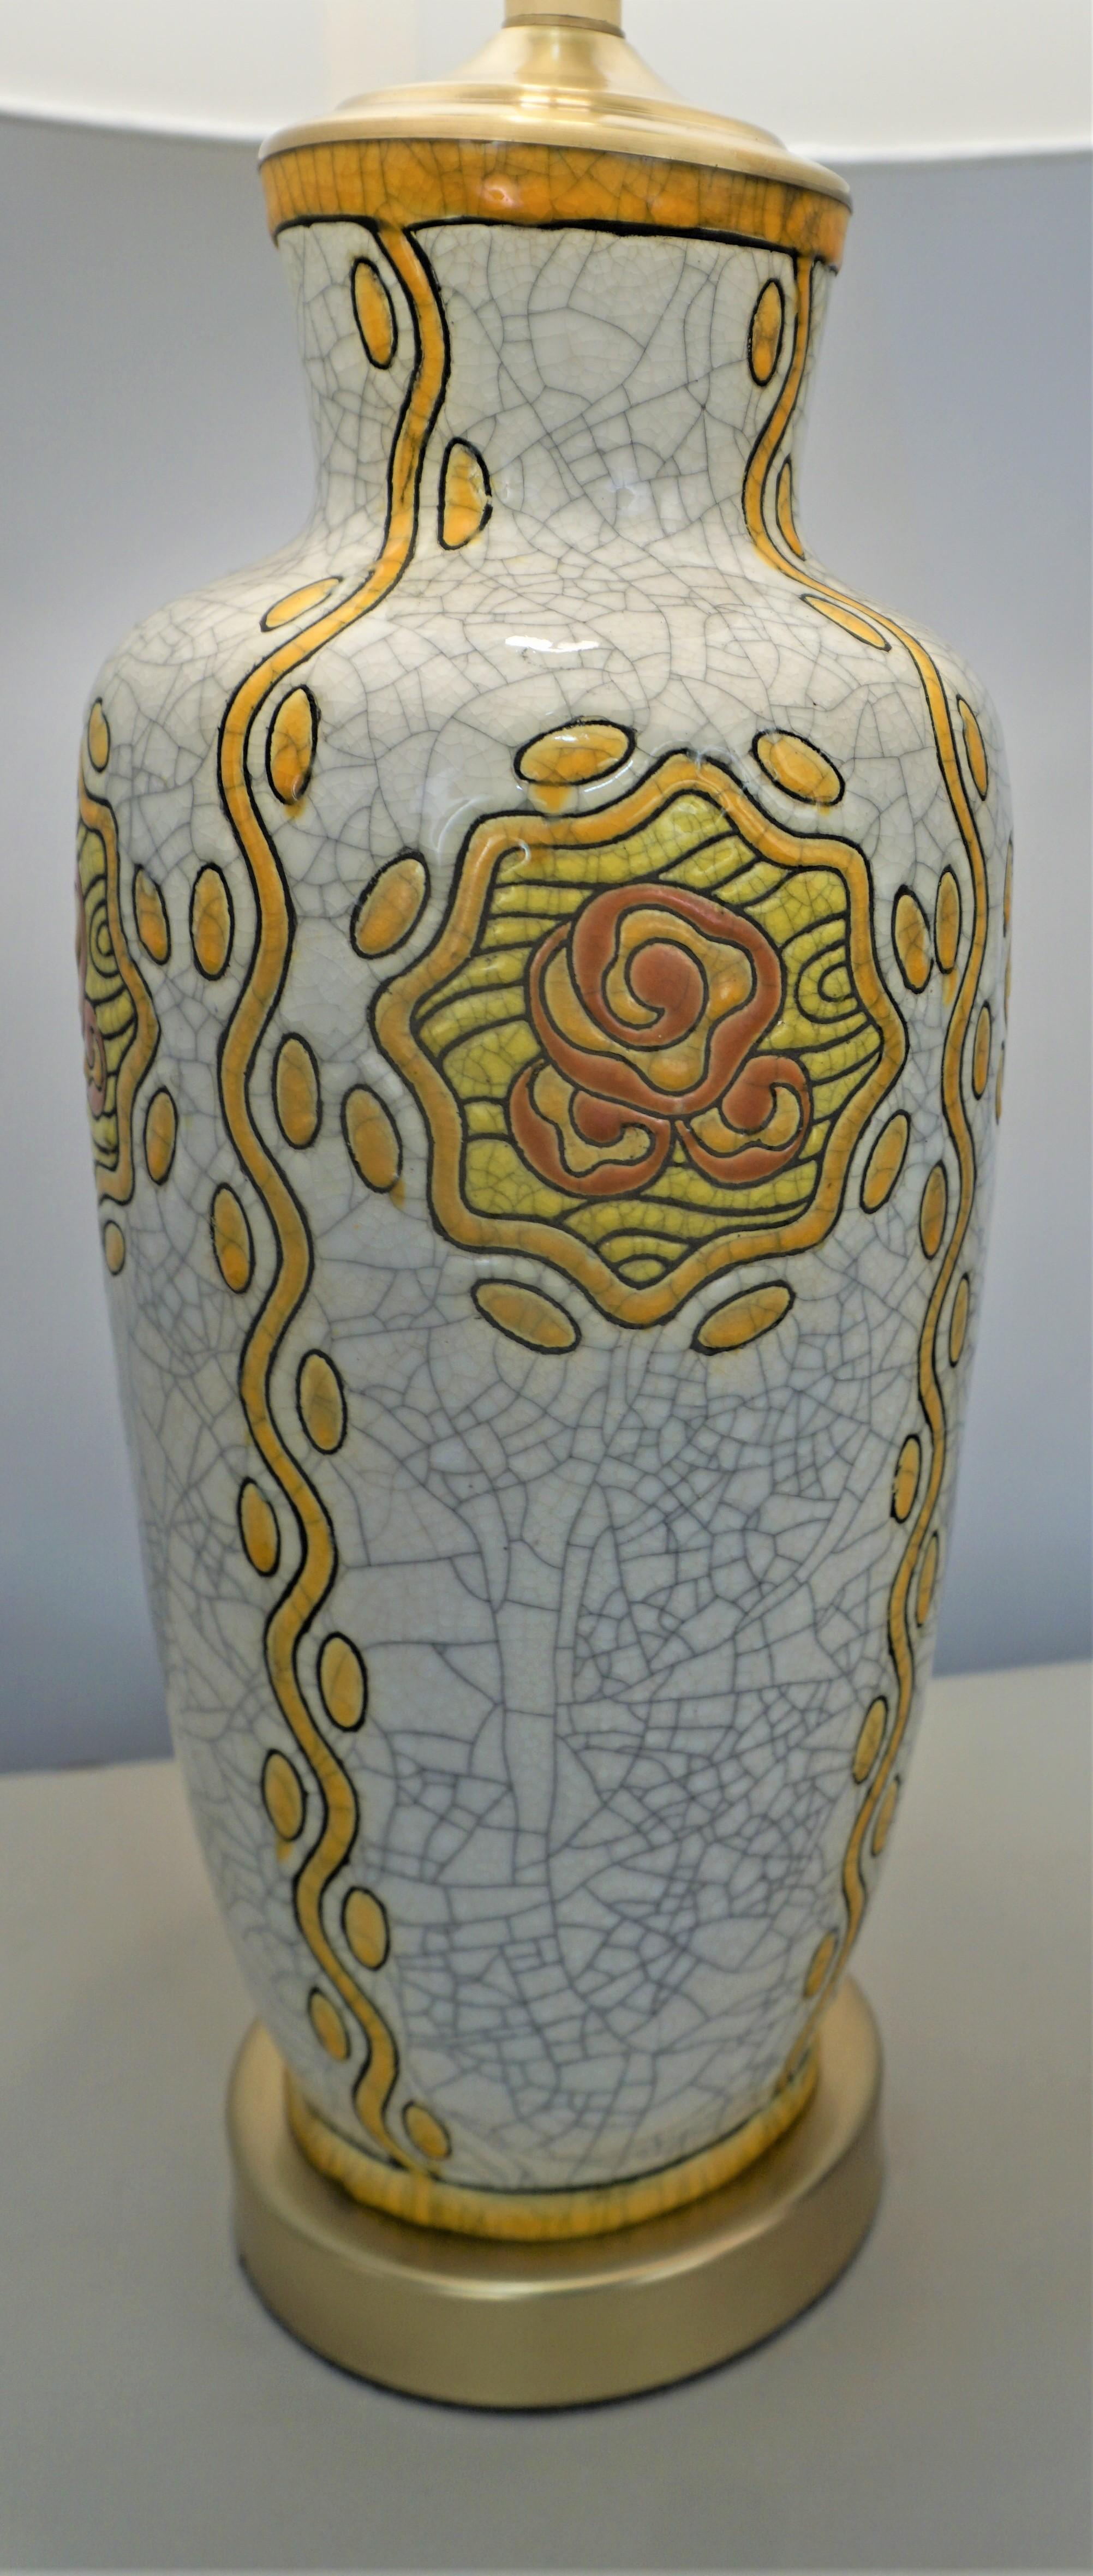 Electrified Lamp Keramis Art Deco Vase by Charles Catteau for Boch In Good Condition For Sale In Fairfax, VA